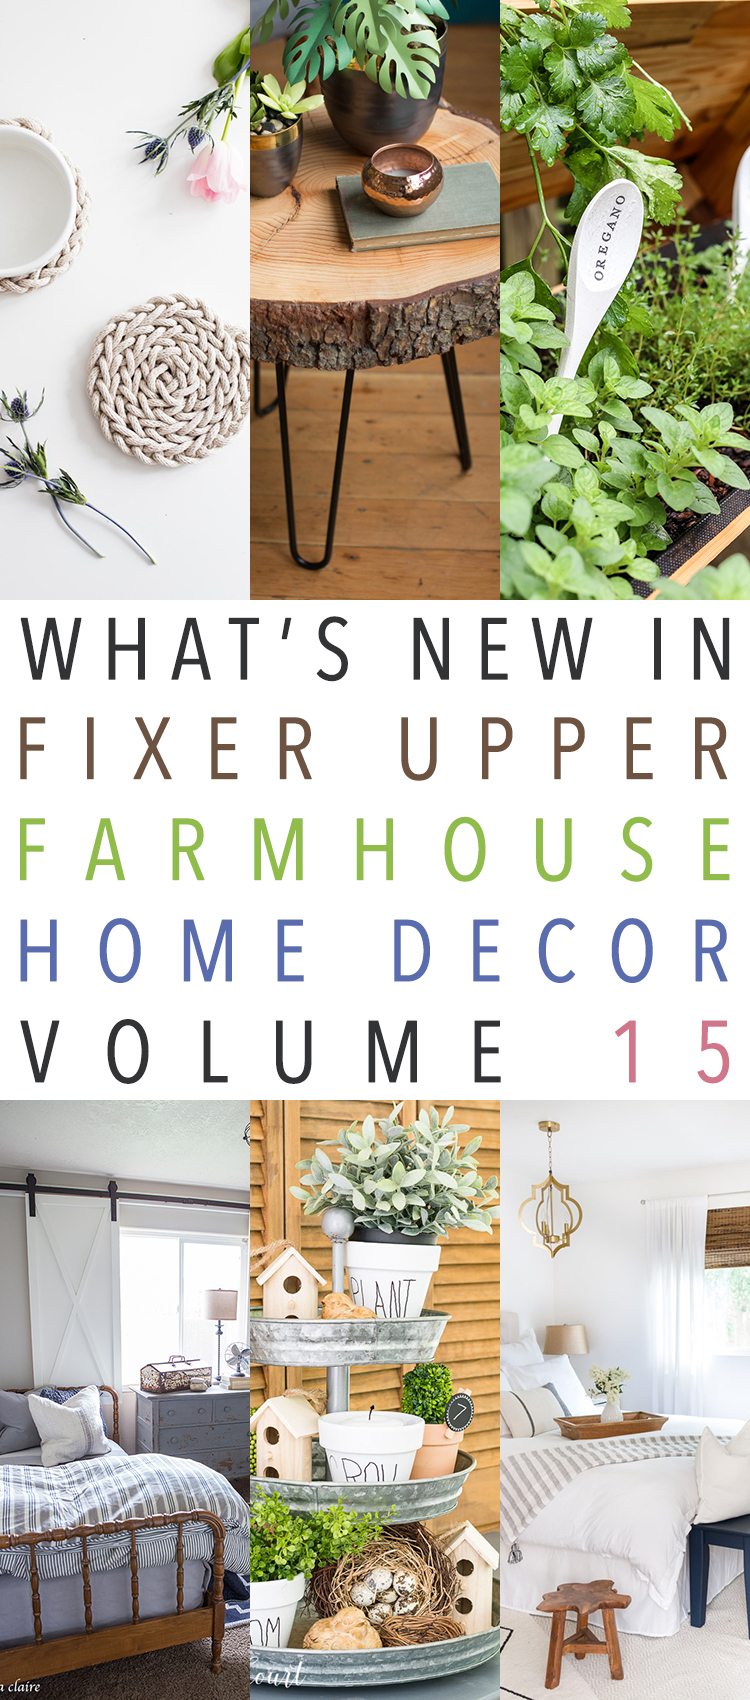 What’s New In Fixer Upper Farmhouse Home Decor Volume 15 - The Cottage ...